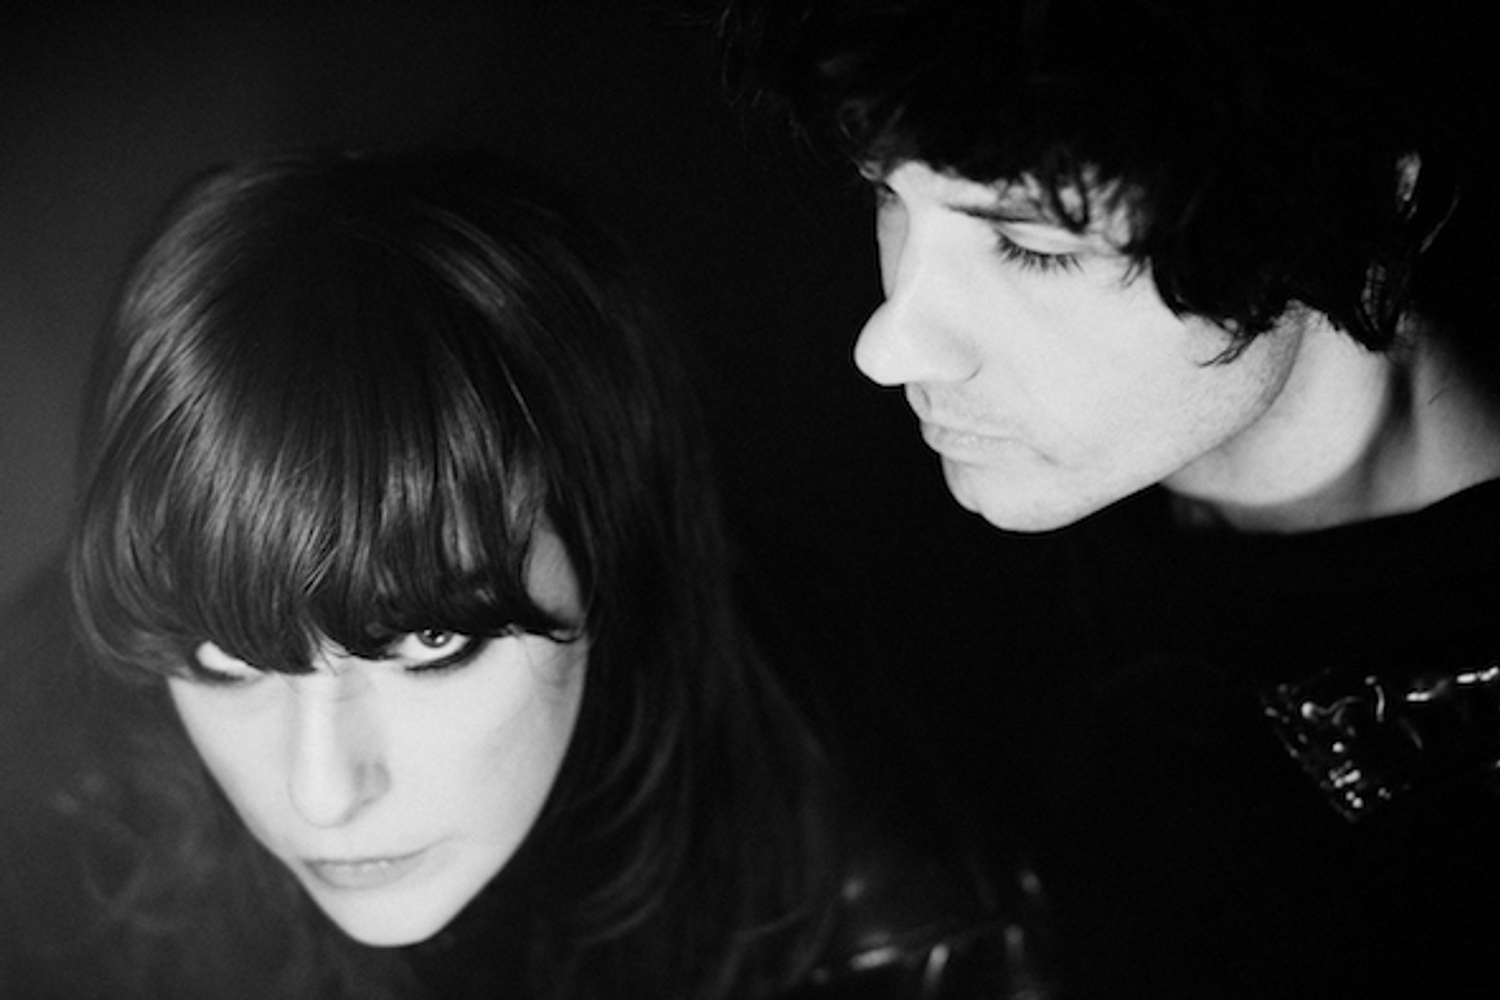 Beach House on new album '7' and pushing forwards